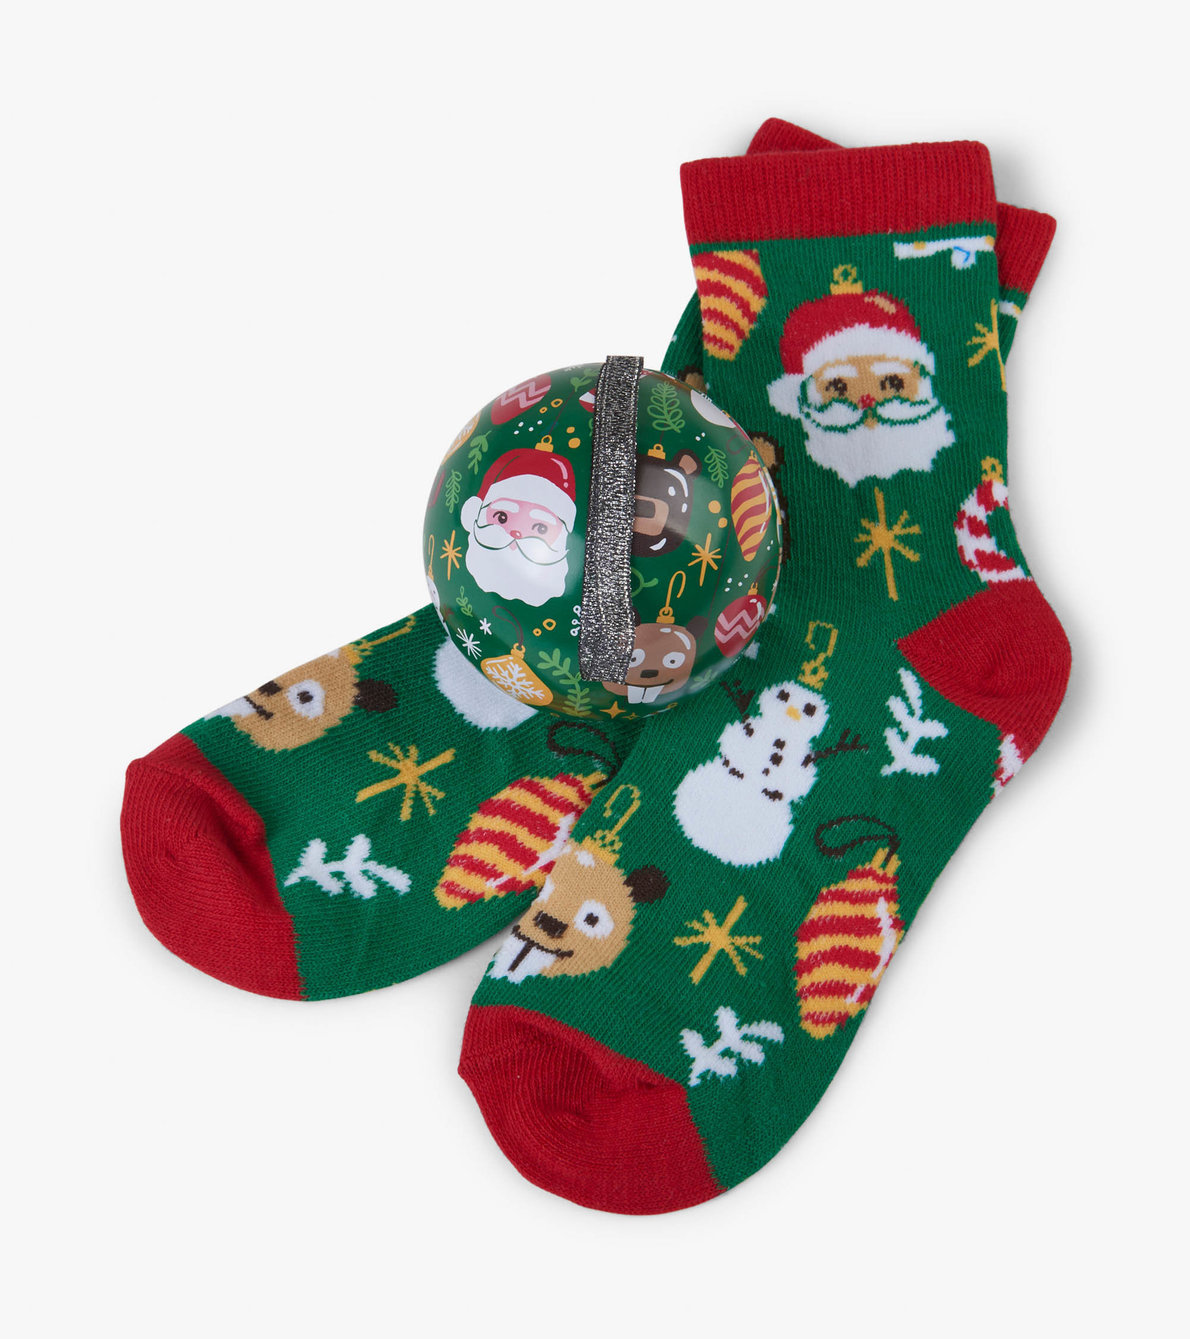 View larger image of Holiday Ornaments Kids Socks in Balls